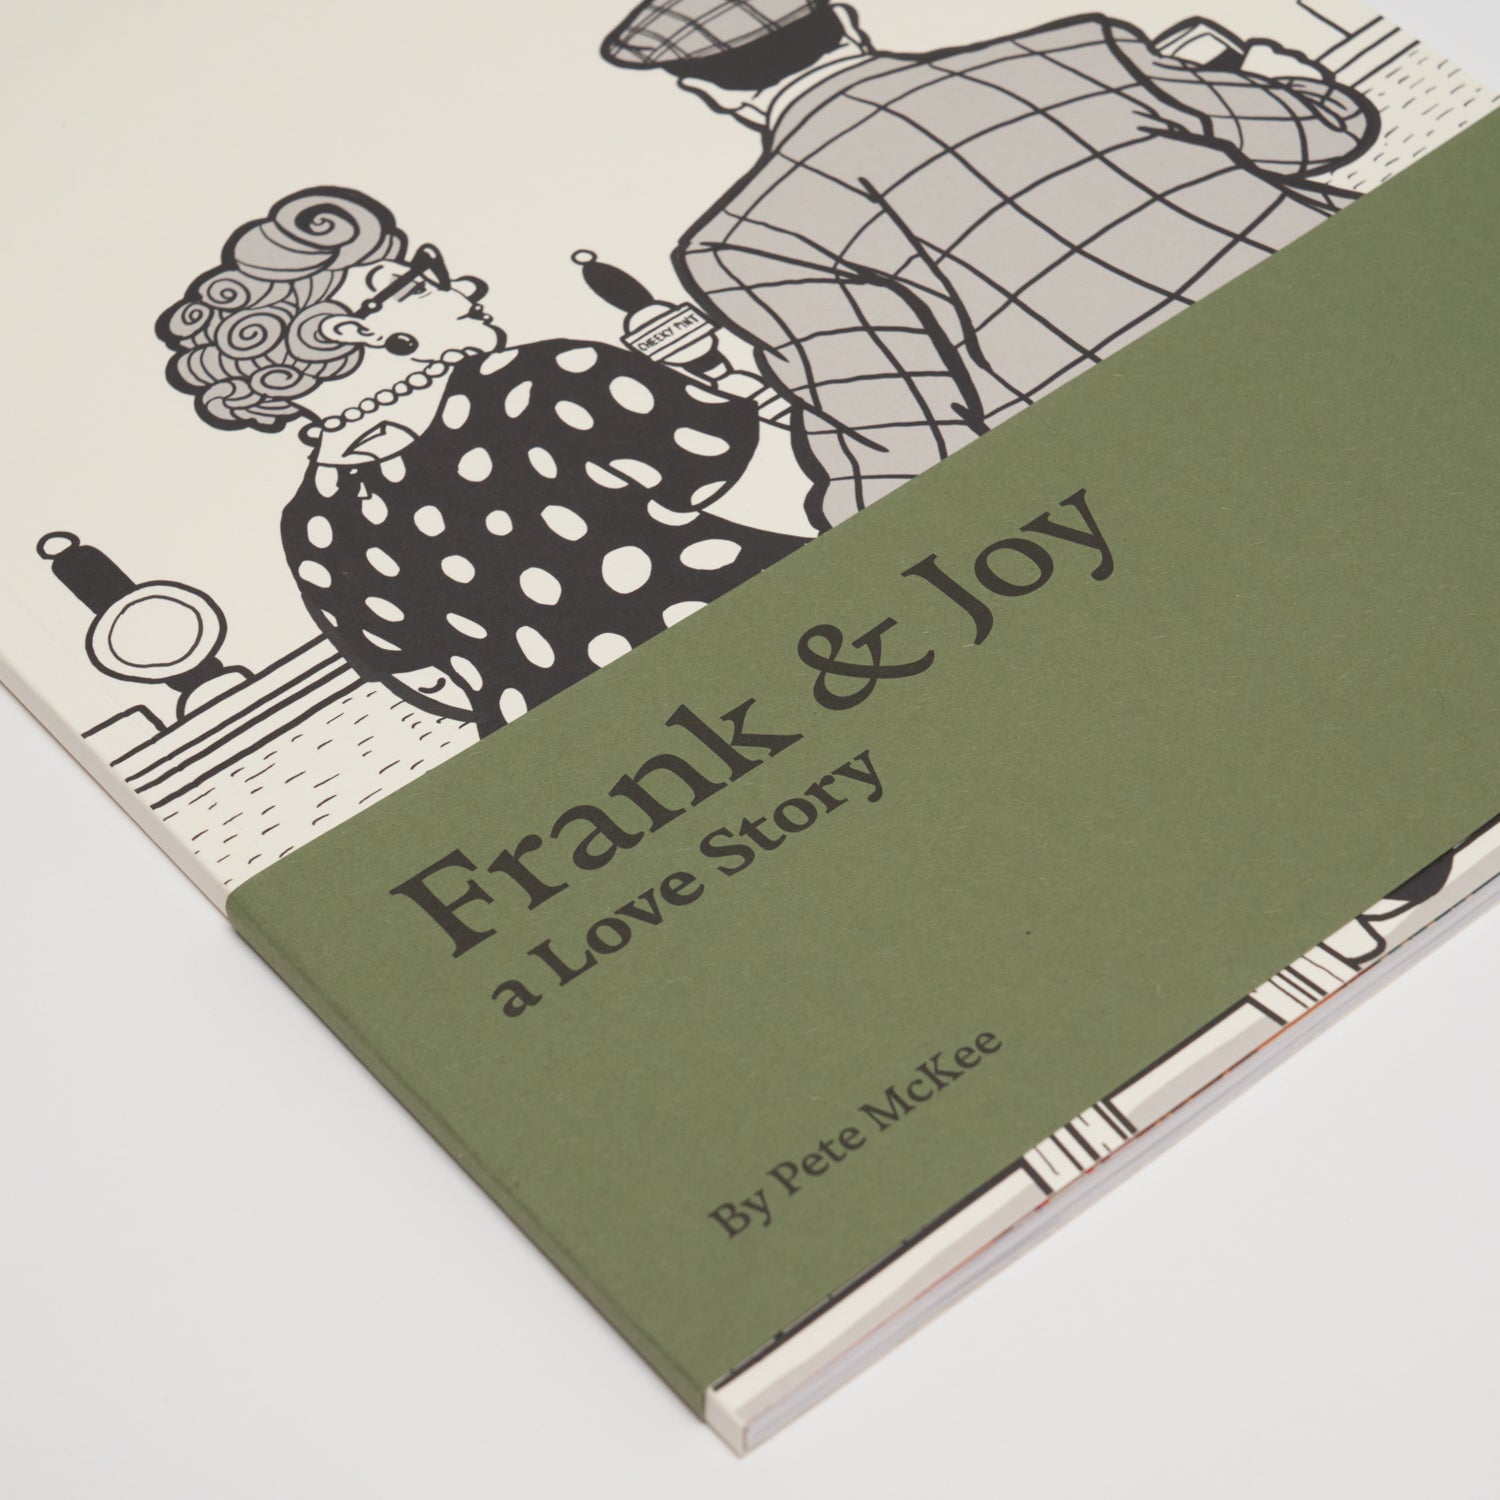 Frank and Joy: a Love Story Exhibition Book